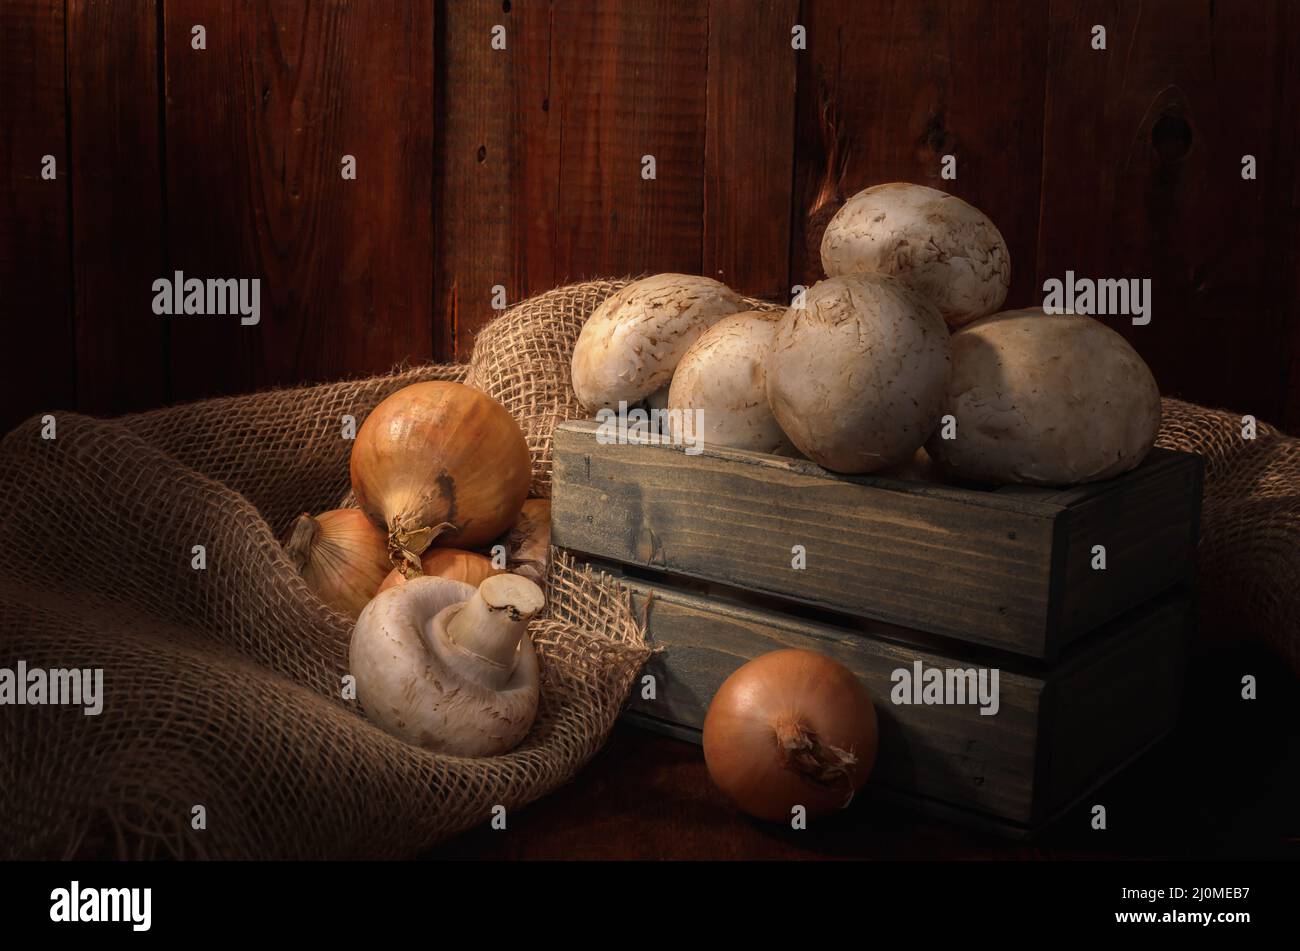 Mushrooms in a wooden box on a dark wooden background in a rustic style Stock Photo